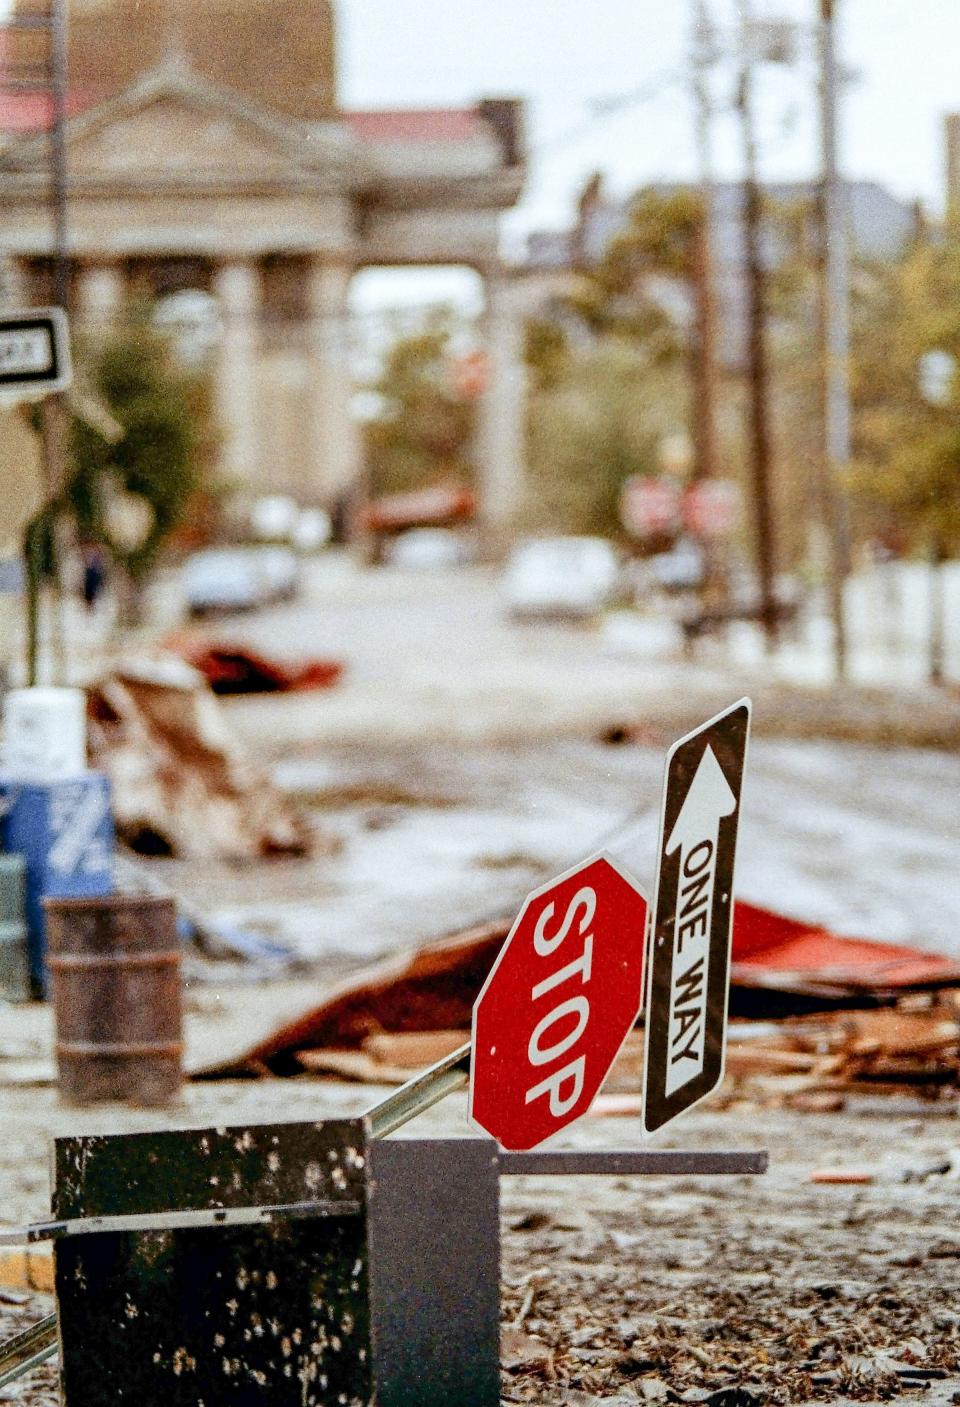 Wind-blown signs near St. Philips Church three days after Hurricane Hugo, standing taller than nearby shops destroyed in September 1989, as seen looking south down Church Street, with back to South Market Street. It was St. Philips Episcopal Church at the time, but is now associated with the worldwide Angelican church.